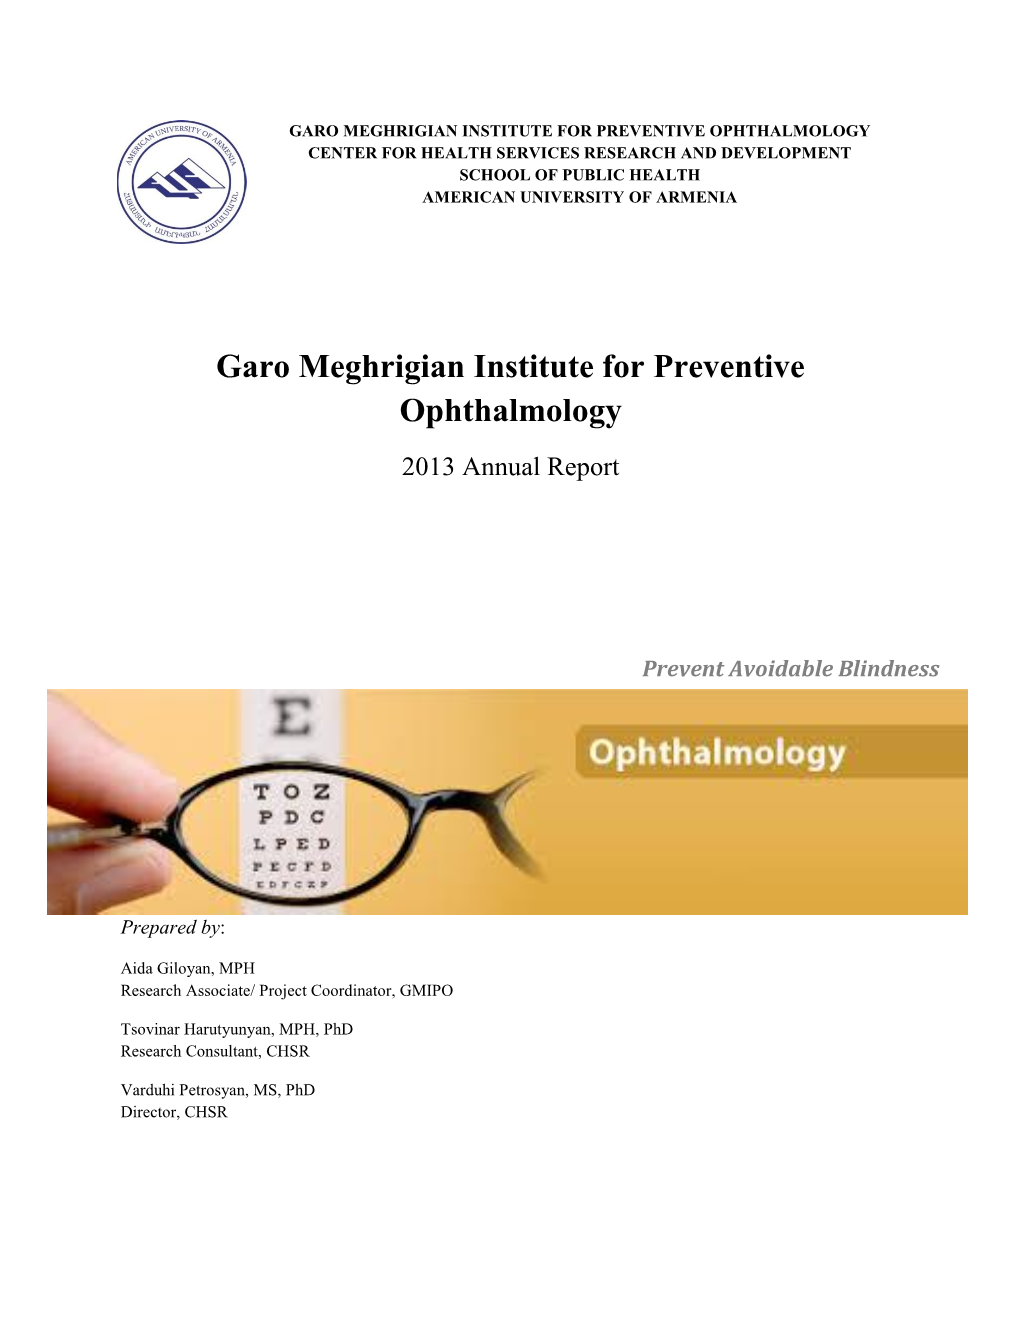 Garo Meghrigian Institute for Preventive Ophthalmology Center for Health Services Research and Development School of Public Health American University of Armenia